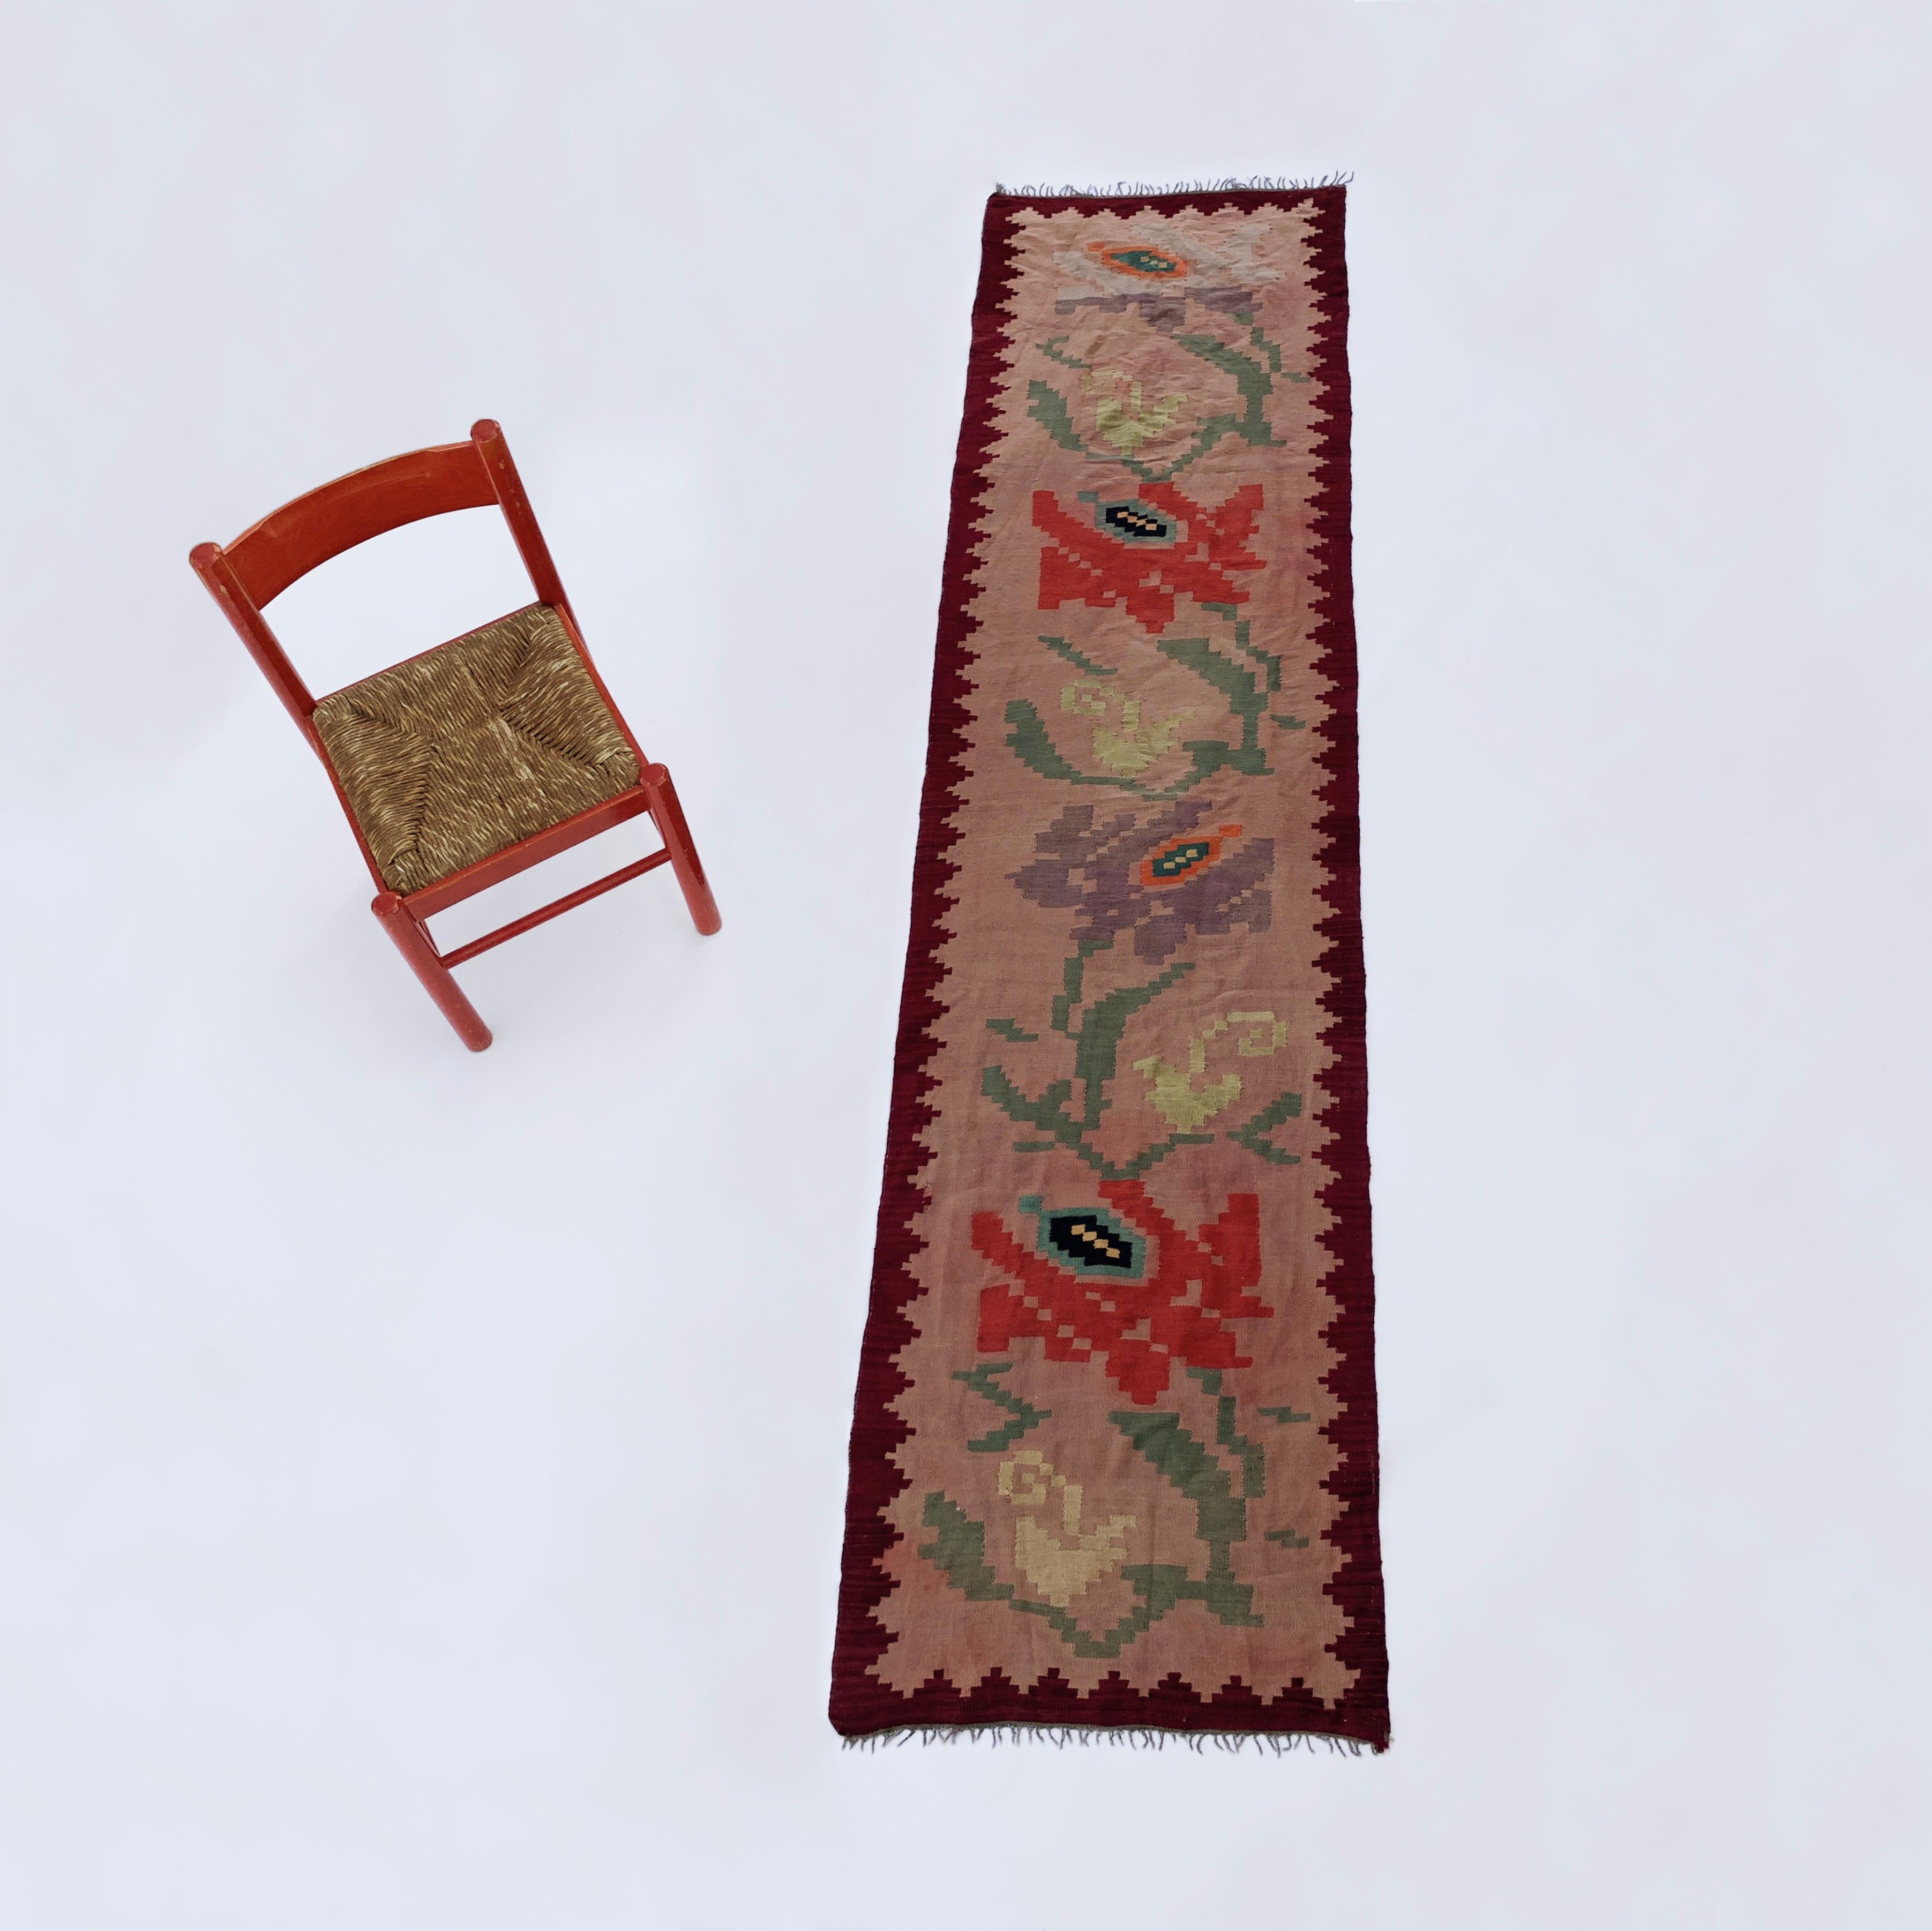 A stunning and lengthy wool runner from 1960s Greece, with an overall shade of pinky red. Can be used as a long runner in a corridor, as a throw over the back of a sofa, or even as a piece of wall art. The rose patterns are in red, purple, and